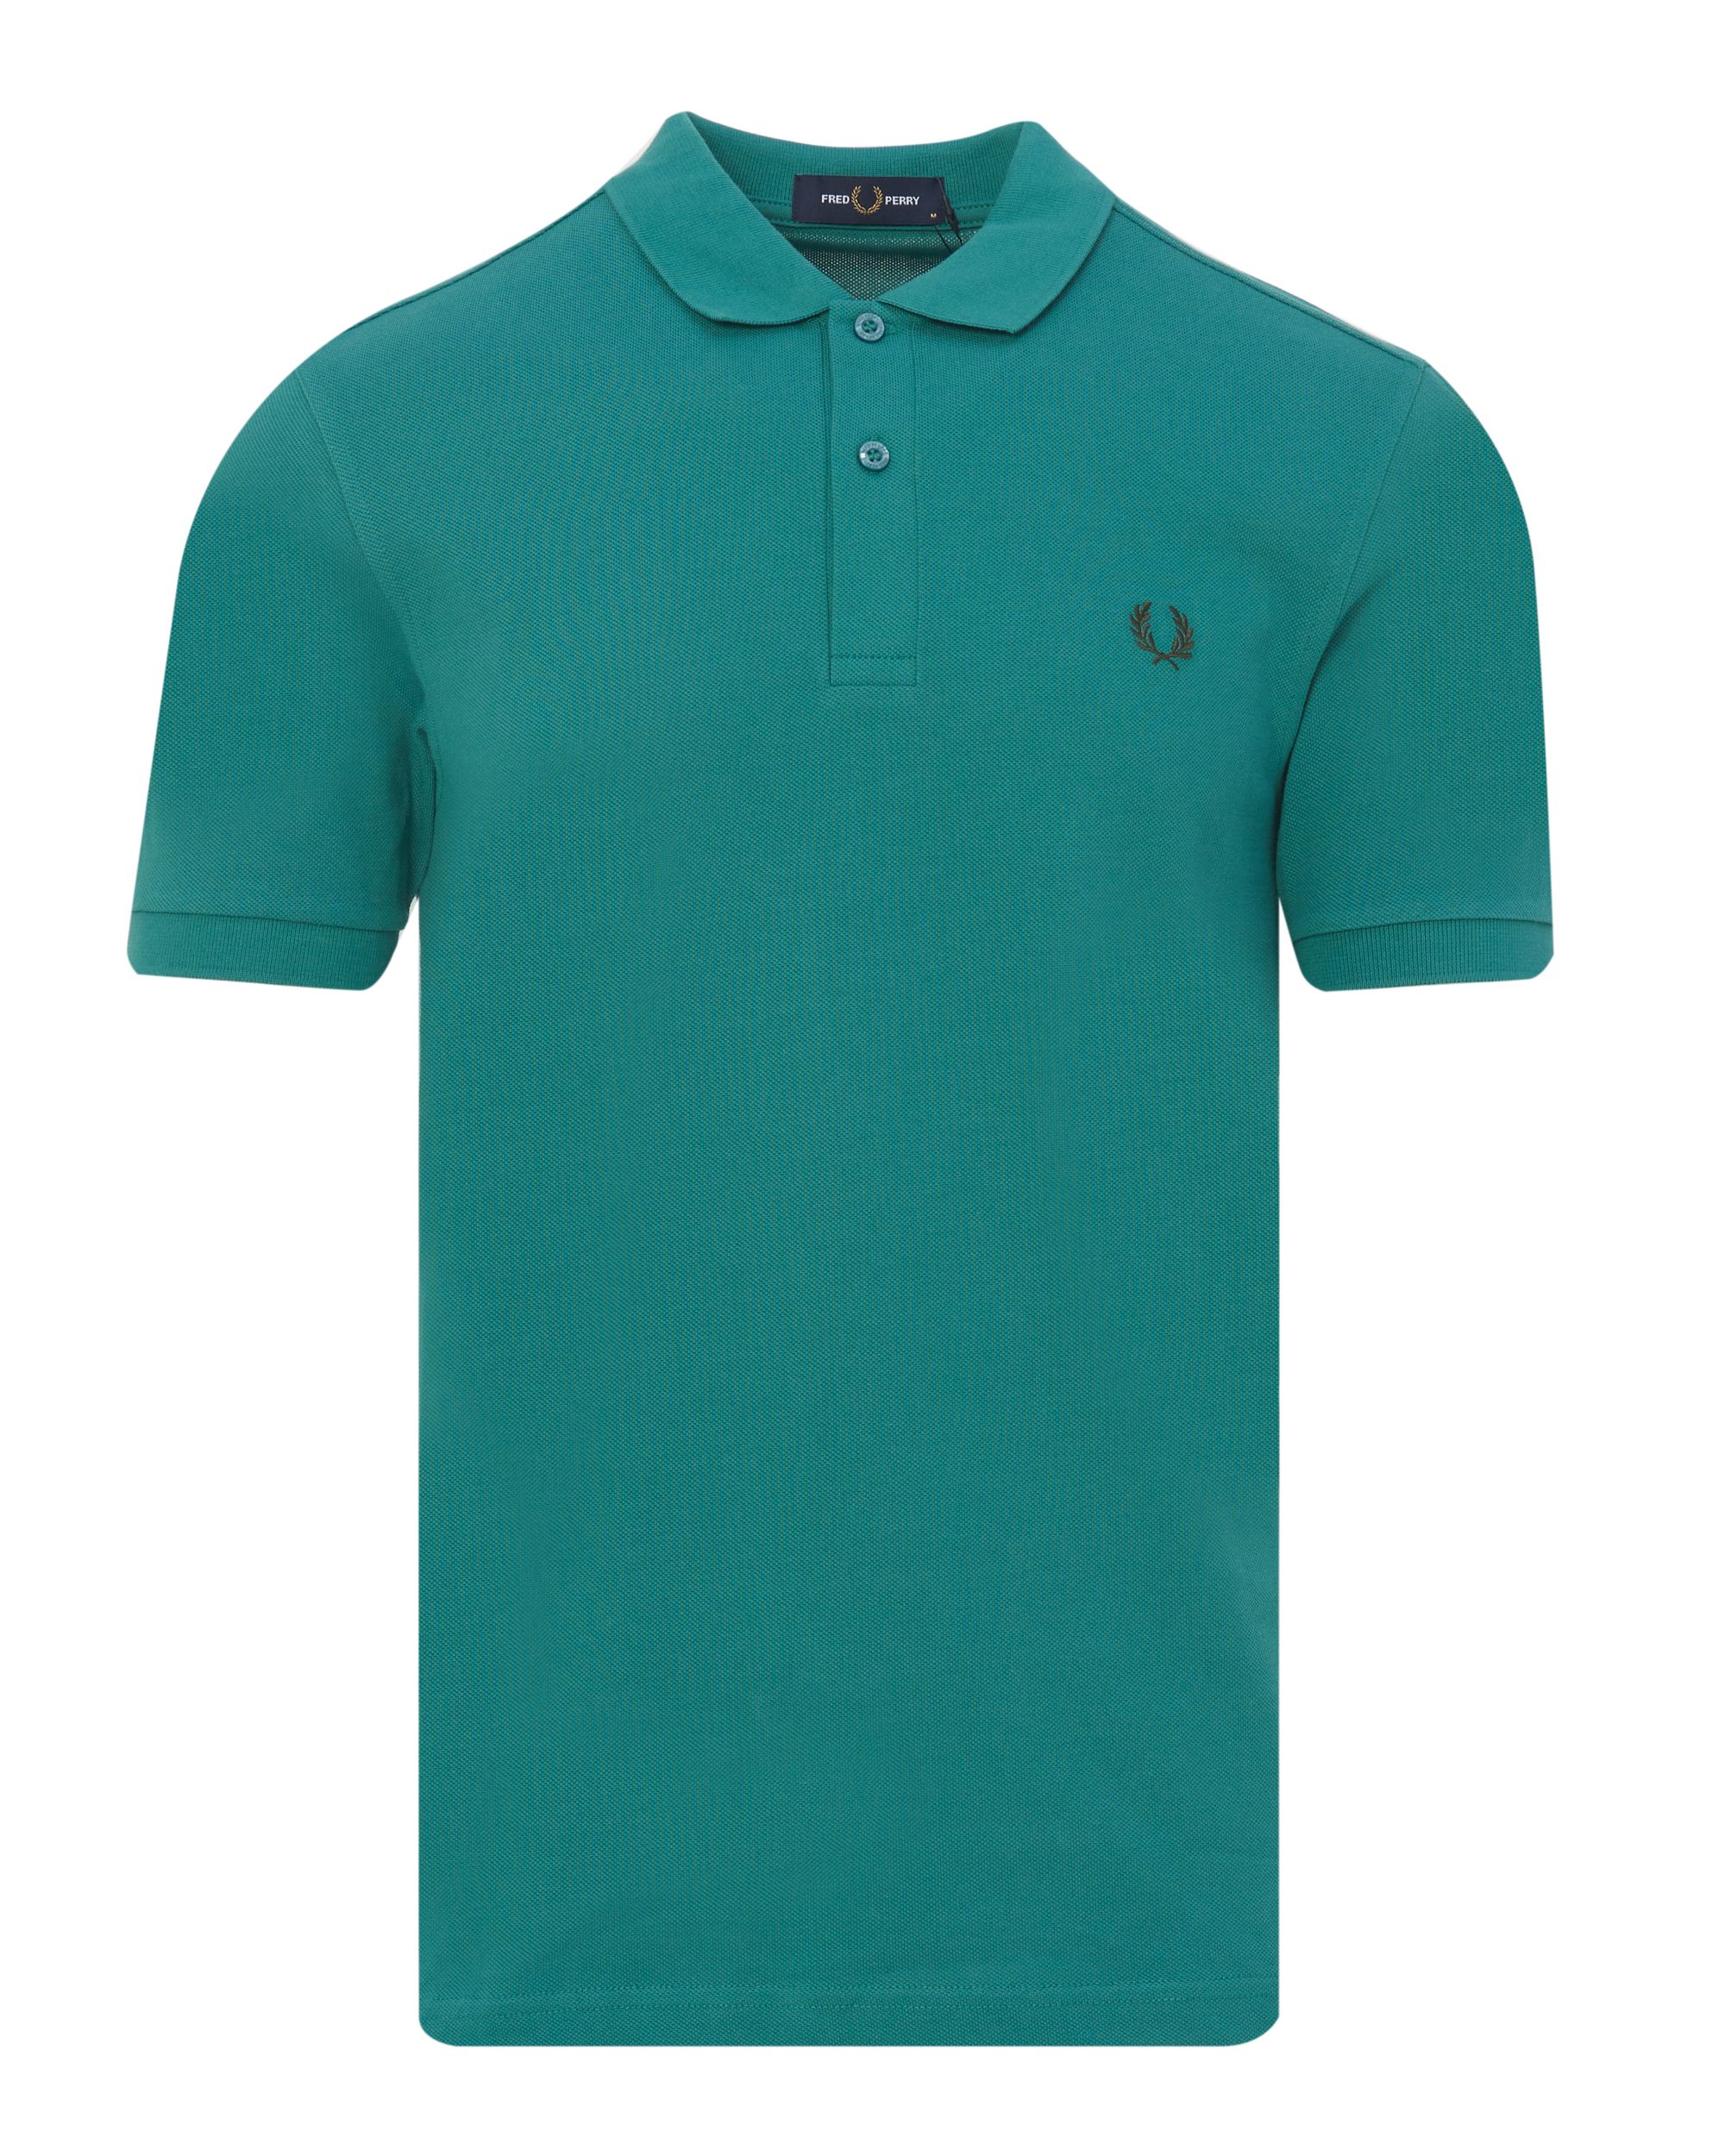 Fred Perry Polo KM Groen 083534-001-L